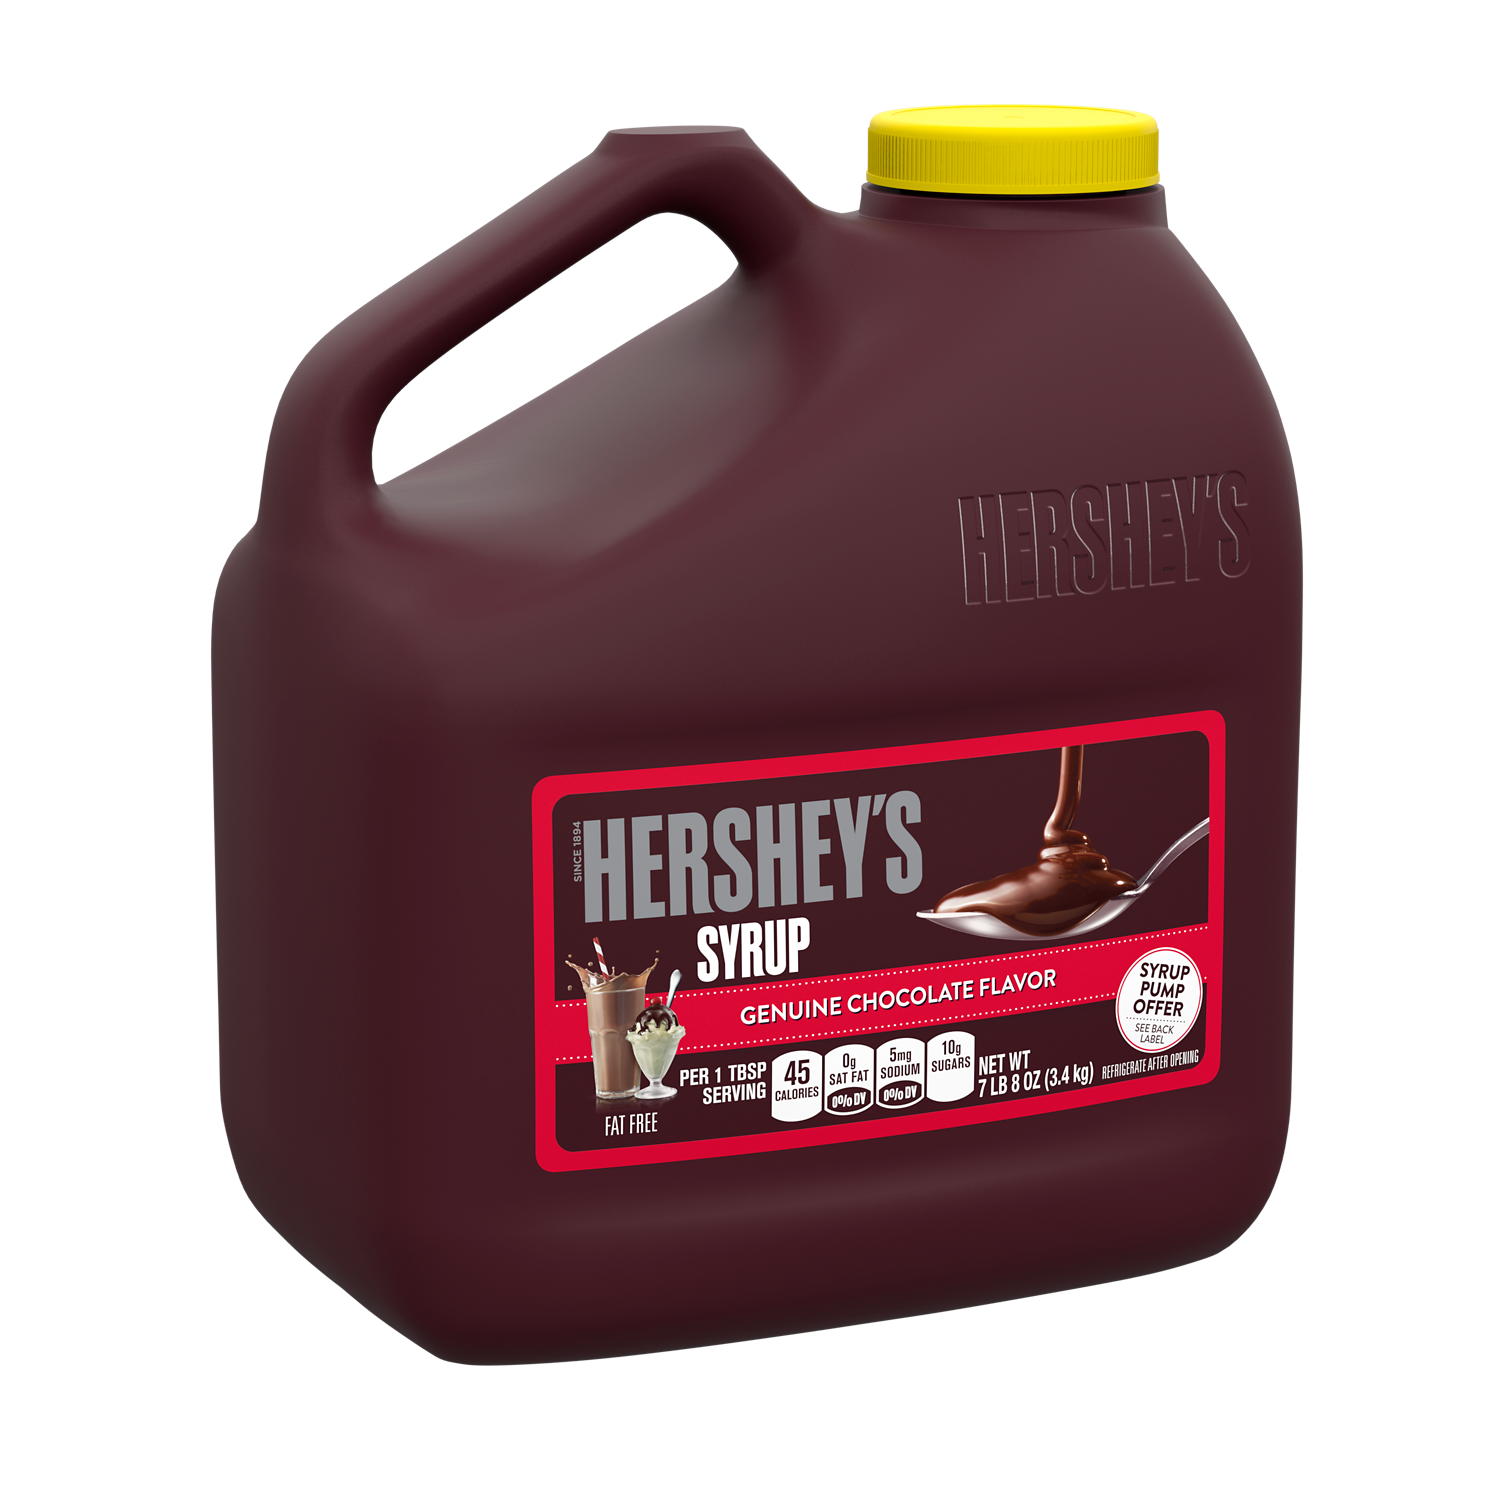 HERSHEY'S Chocolate Syrup, 120 oz jug - Left Side of Package